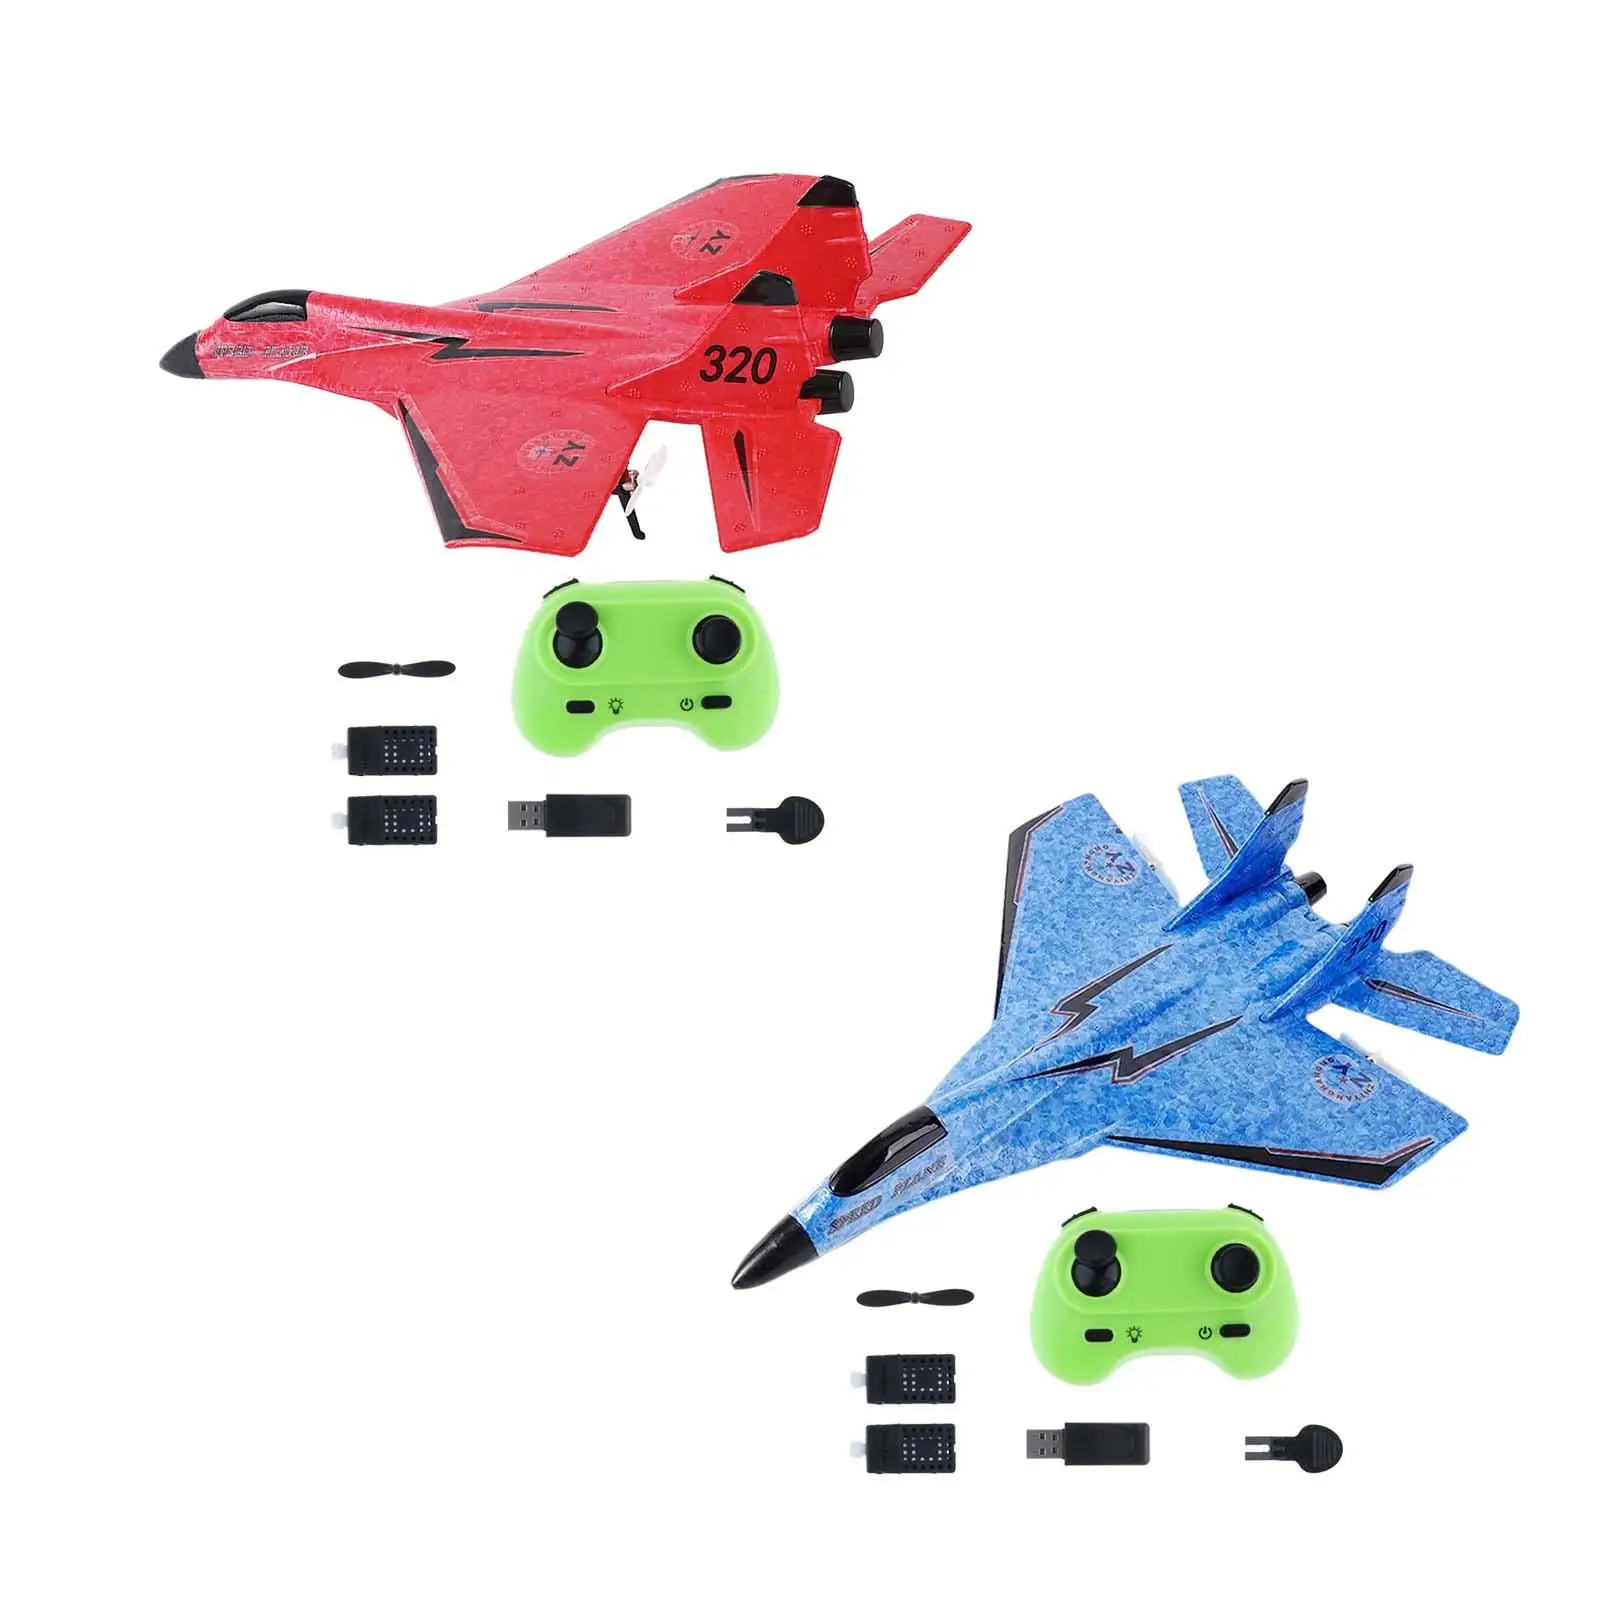 2CH RC Plane Outdoor Toys Ready to Flying Easy to Control Foam RC Glider Aircraft Model for Beginner Adults Kids Boys Girls